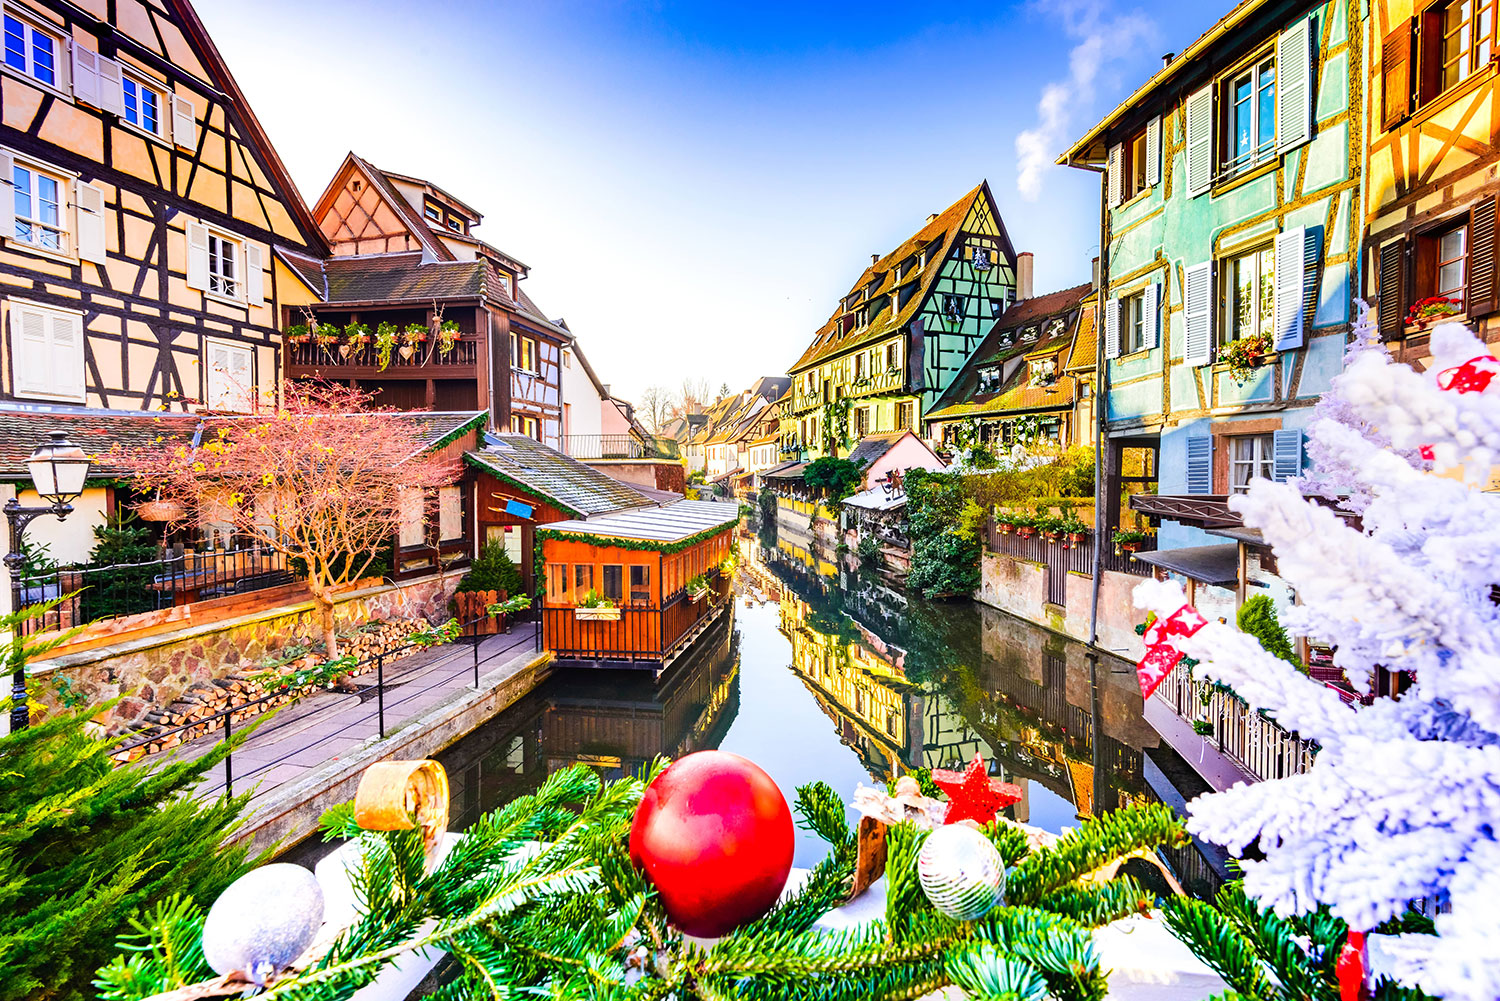 The 12 best European cities to experience a magical Christmas